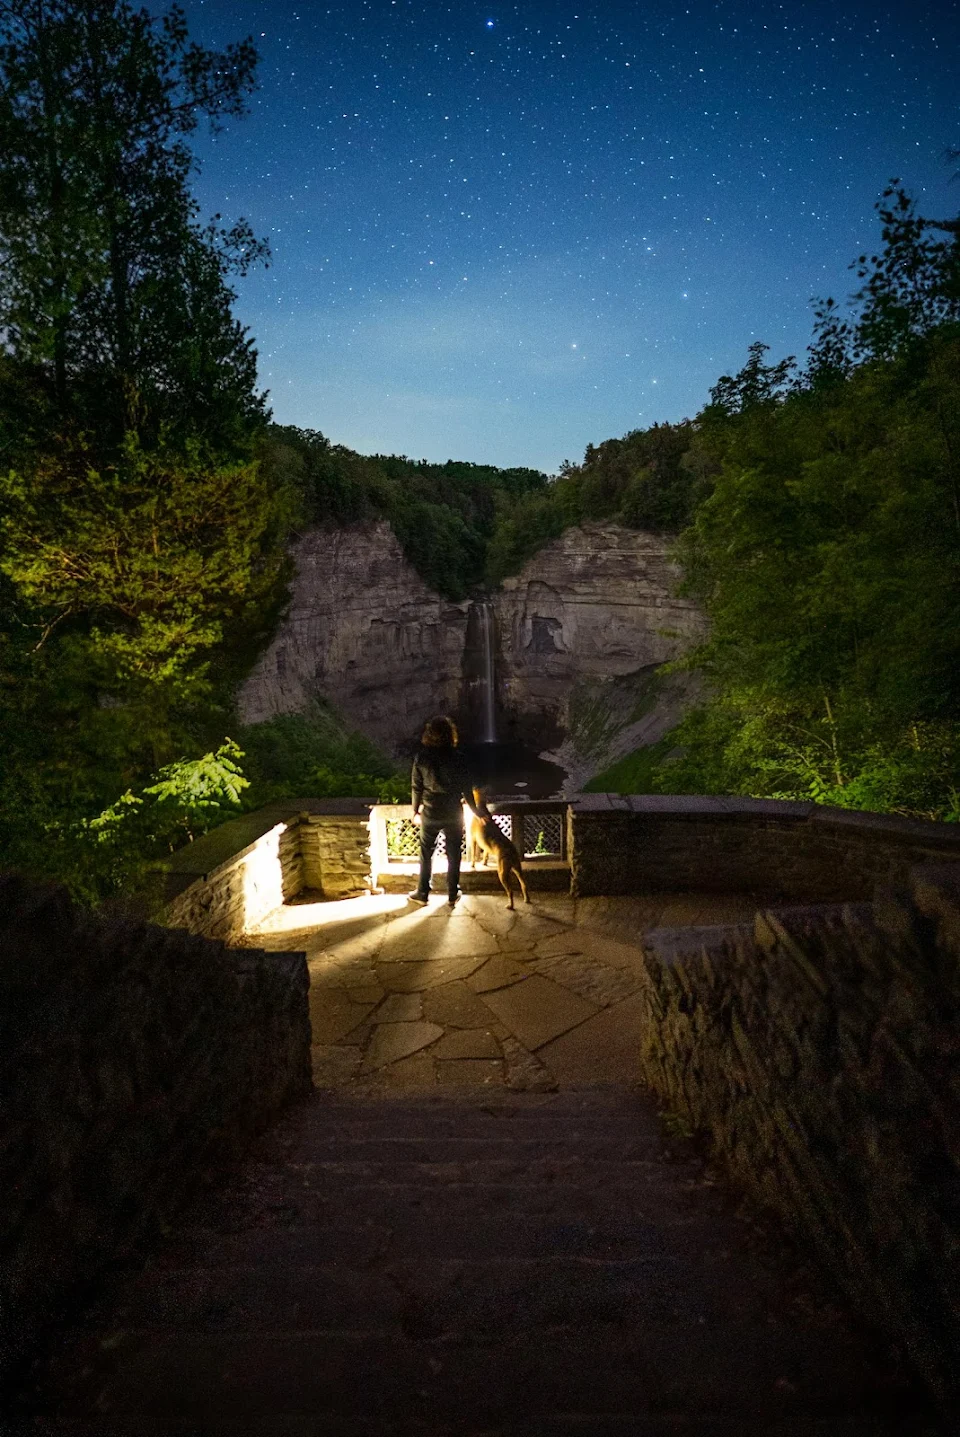 Under the stars with my boxer, Kona. Overlooking Taughannock Falls in NY